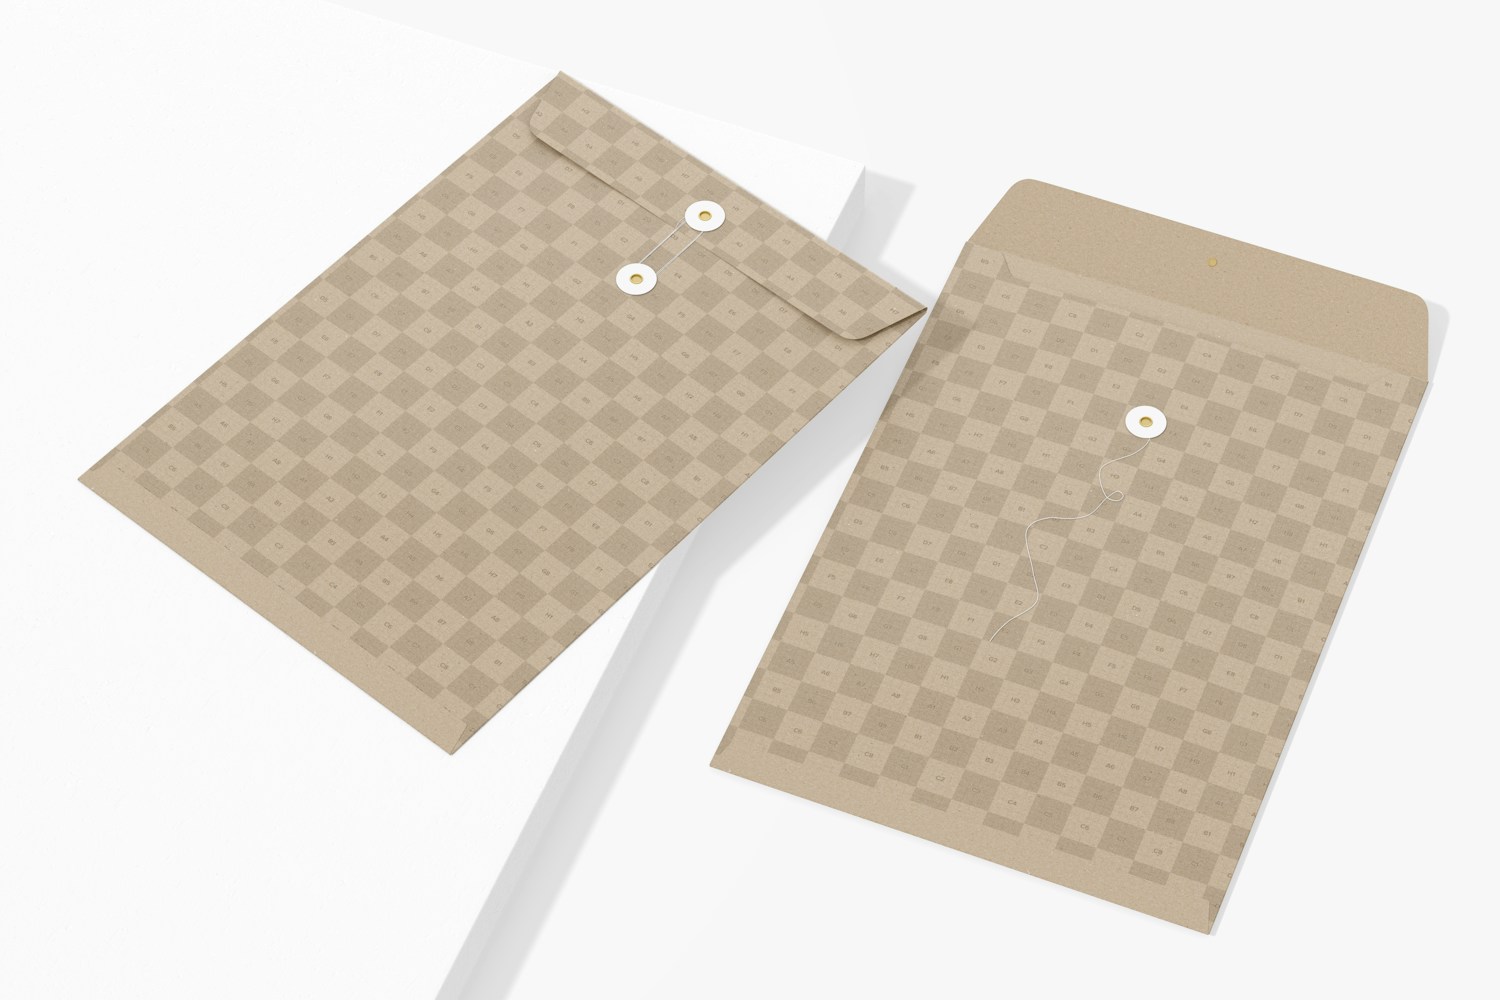 C4 String Envelopes Mockup, Opened and Closed